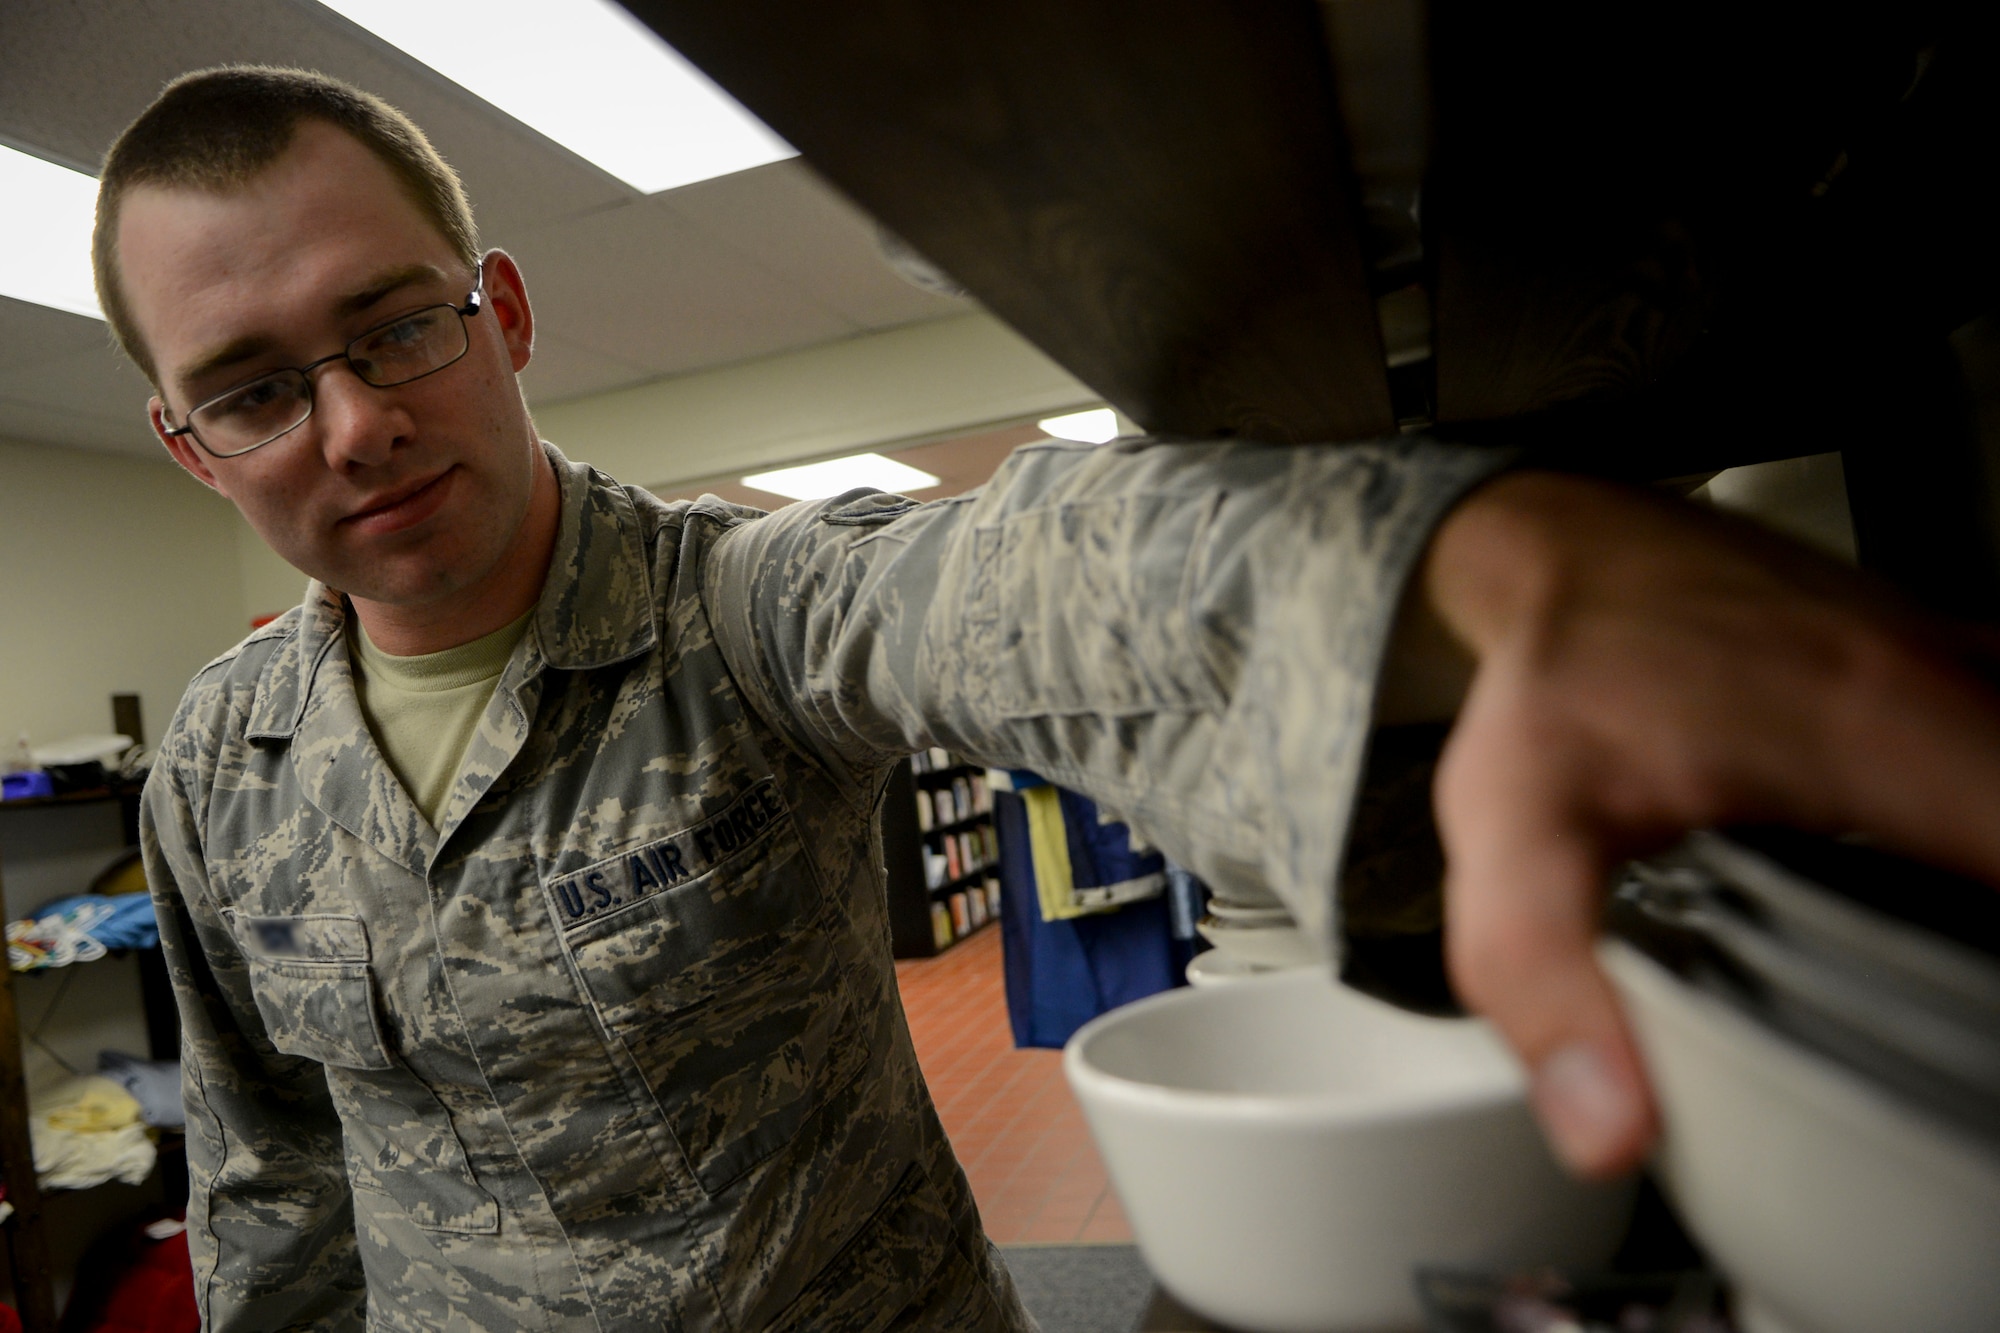 Airman 1st Class Colton, 9th Intelligence Squadron, looks for dishware at the Airman’s Attic on Beale Air Force Base, Calif., July 15, 2014. The Airman’s Attic is a place where E-7s and below, as well as 0-3s and below, can get free clothing and household items. During the fourth Saturday of every month the Airman’s Attic is open to all ranks. (U.S. Air Force photo by Senior Airman Shana Wojcik/Released)